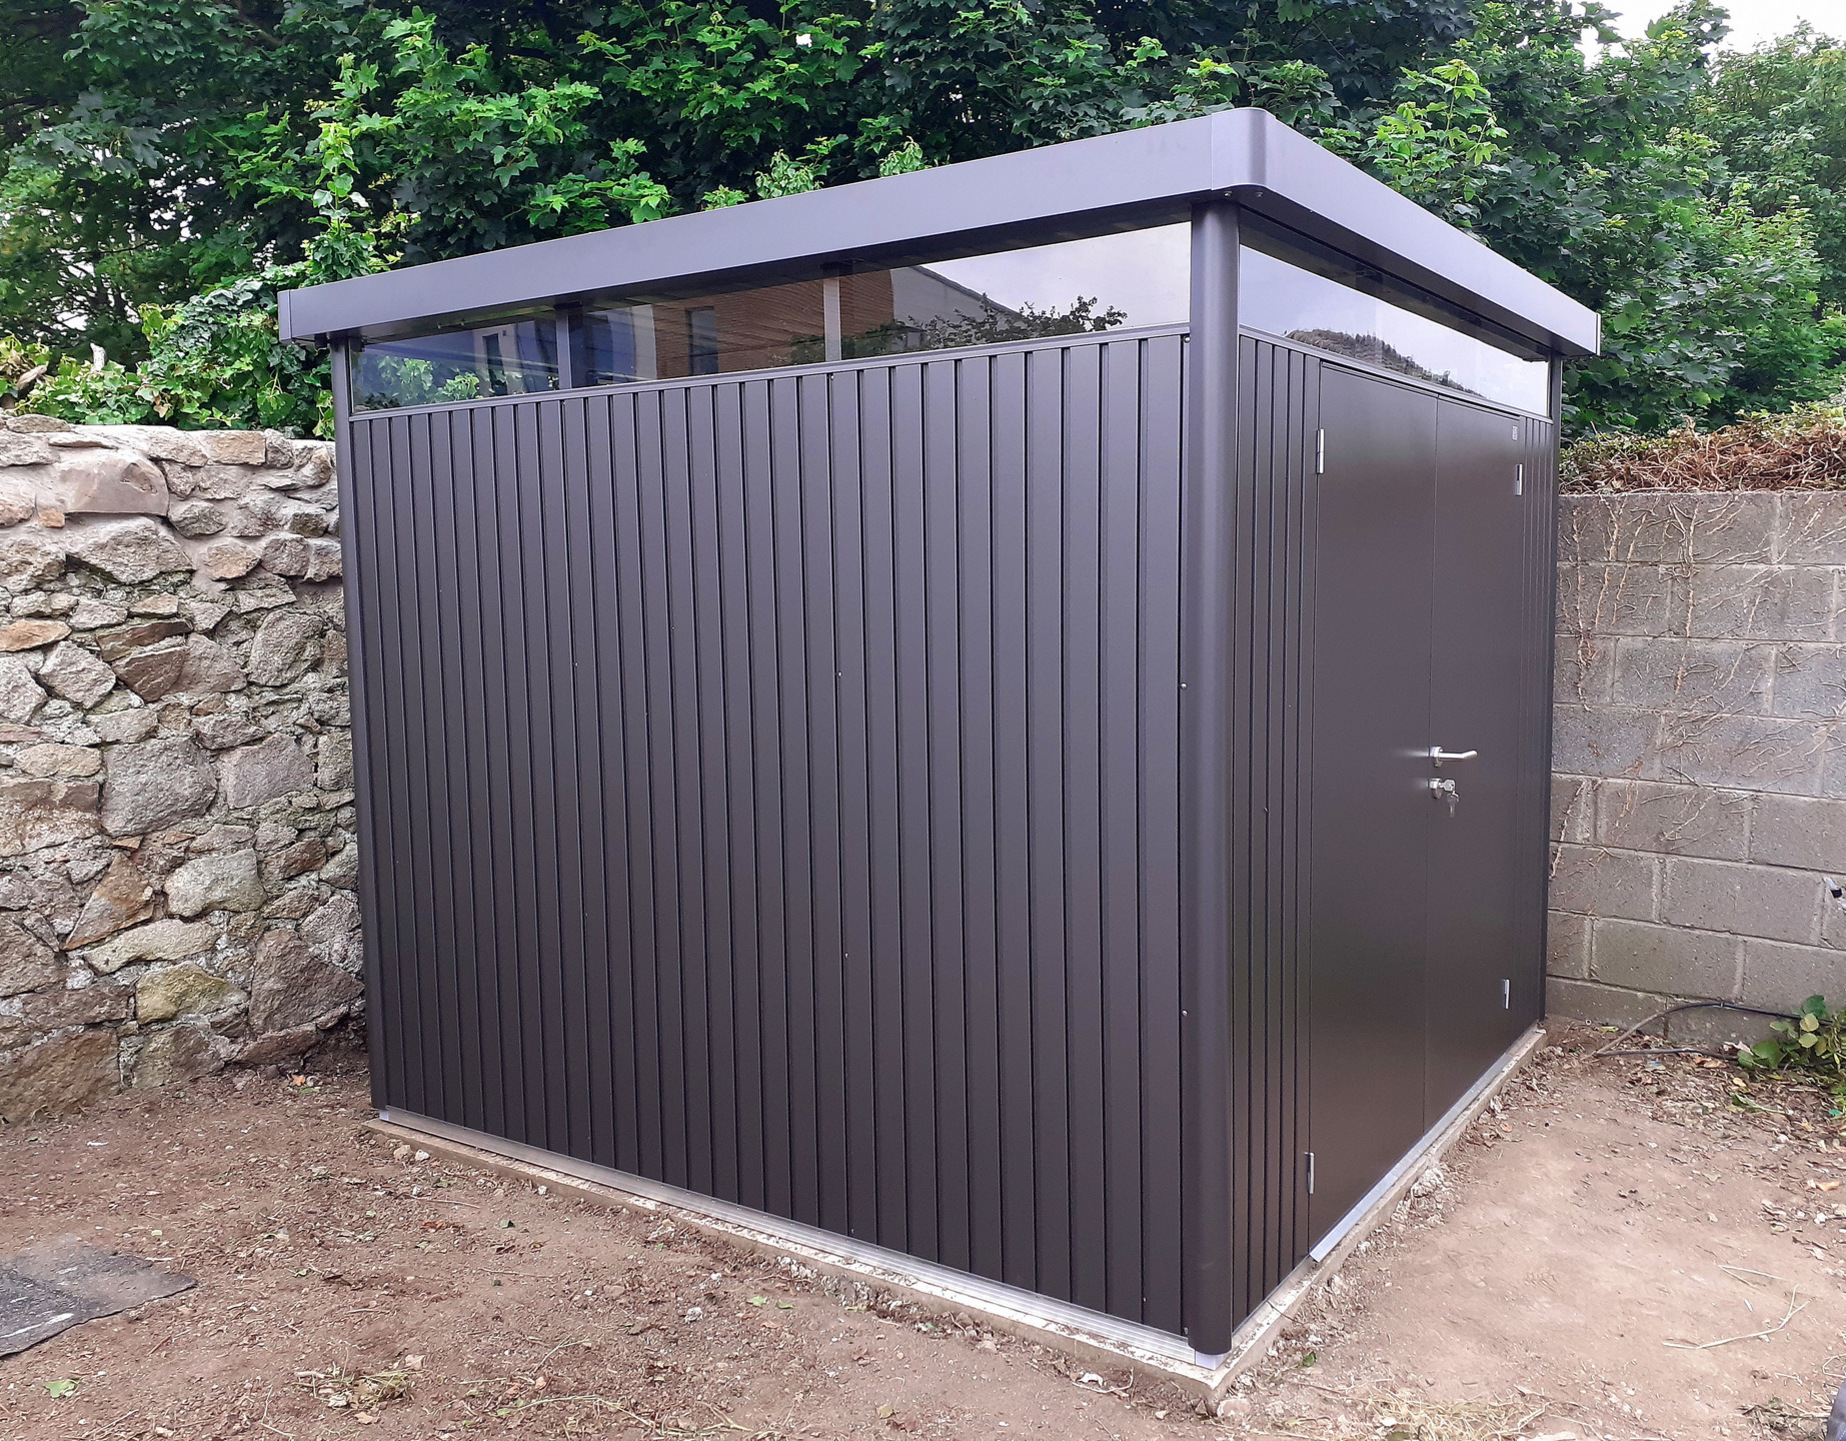 The Biohort HighLine H4 in metallic dark grey with optional accessories including aluminium floor frame & panels, electrical mounting panel |  Supplied + Fitted in Clonskeagh, Dublin 14 by Owen Chubb